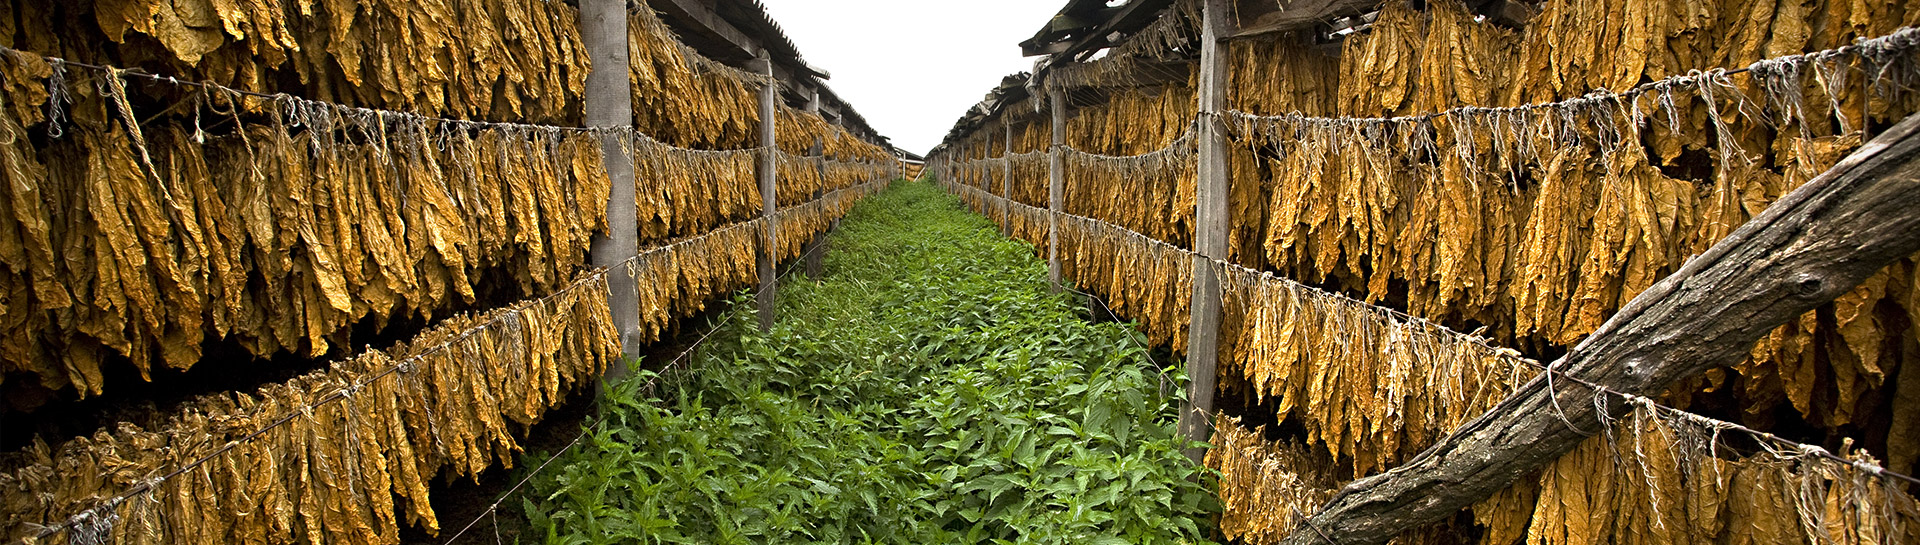 background of tabacco fields for cigars